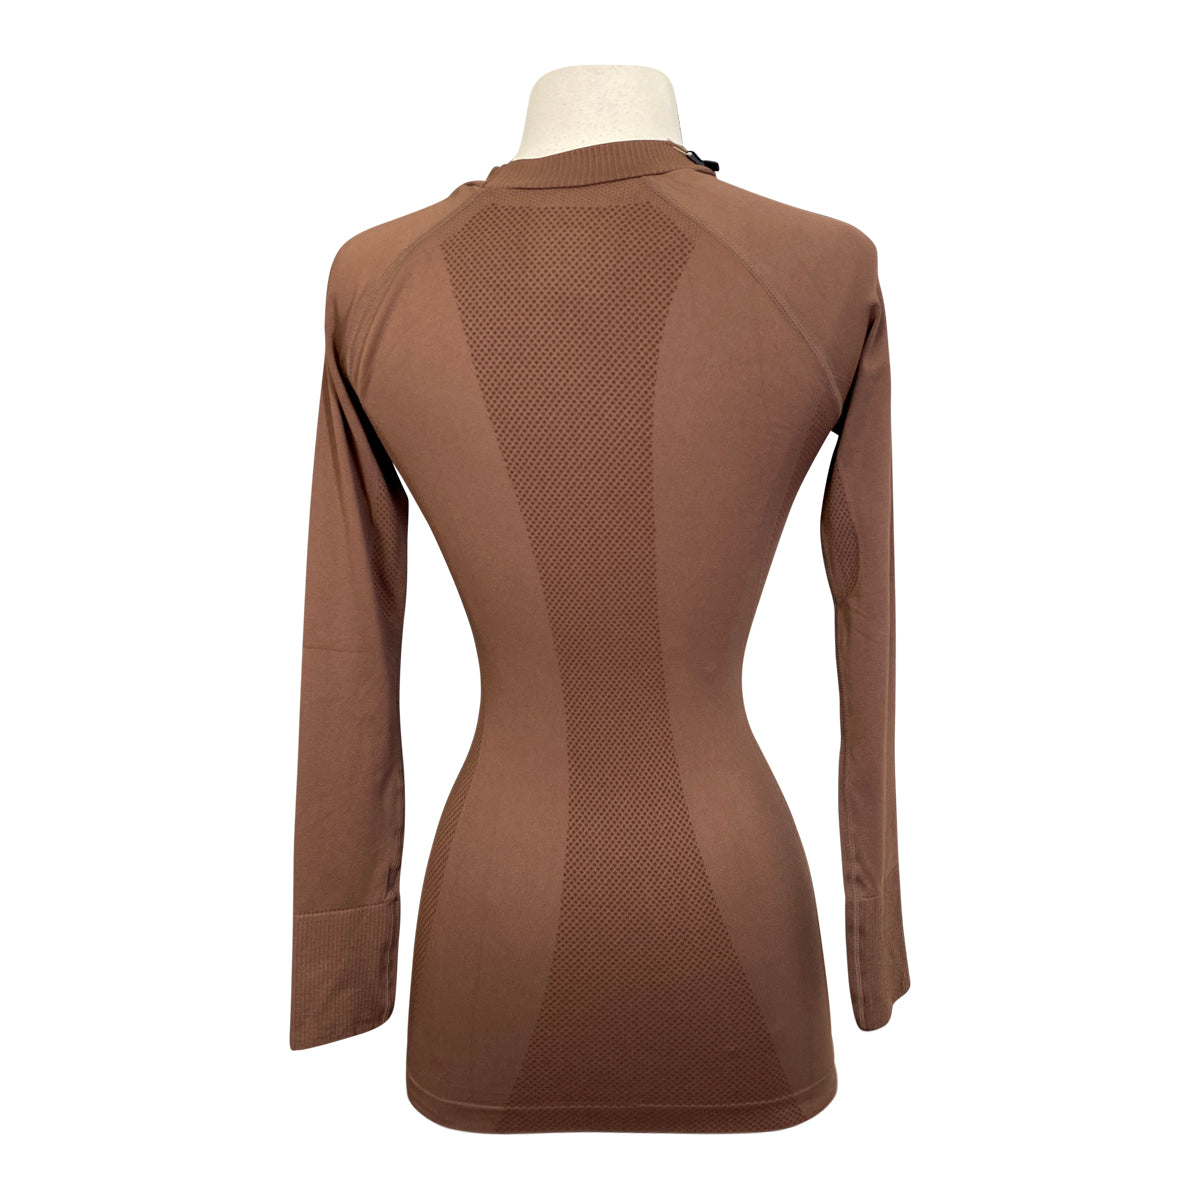 FitEq Long Sleeve Seamless Schooling Top in Cocoa